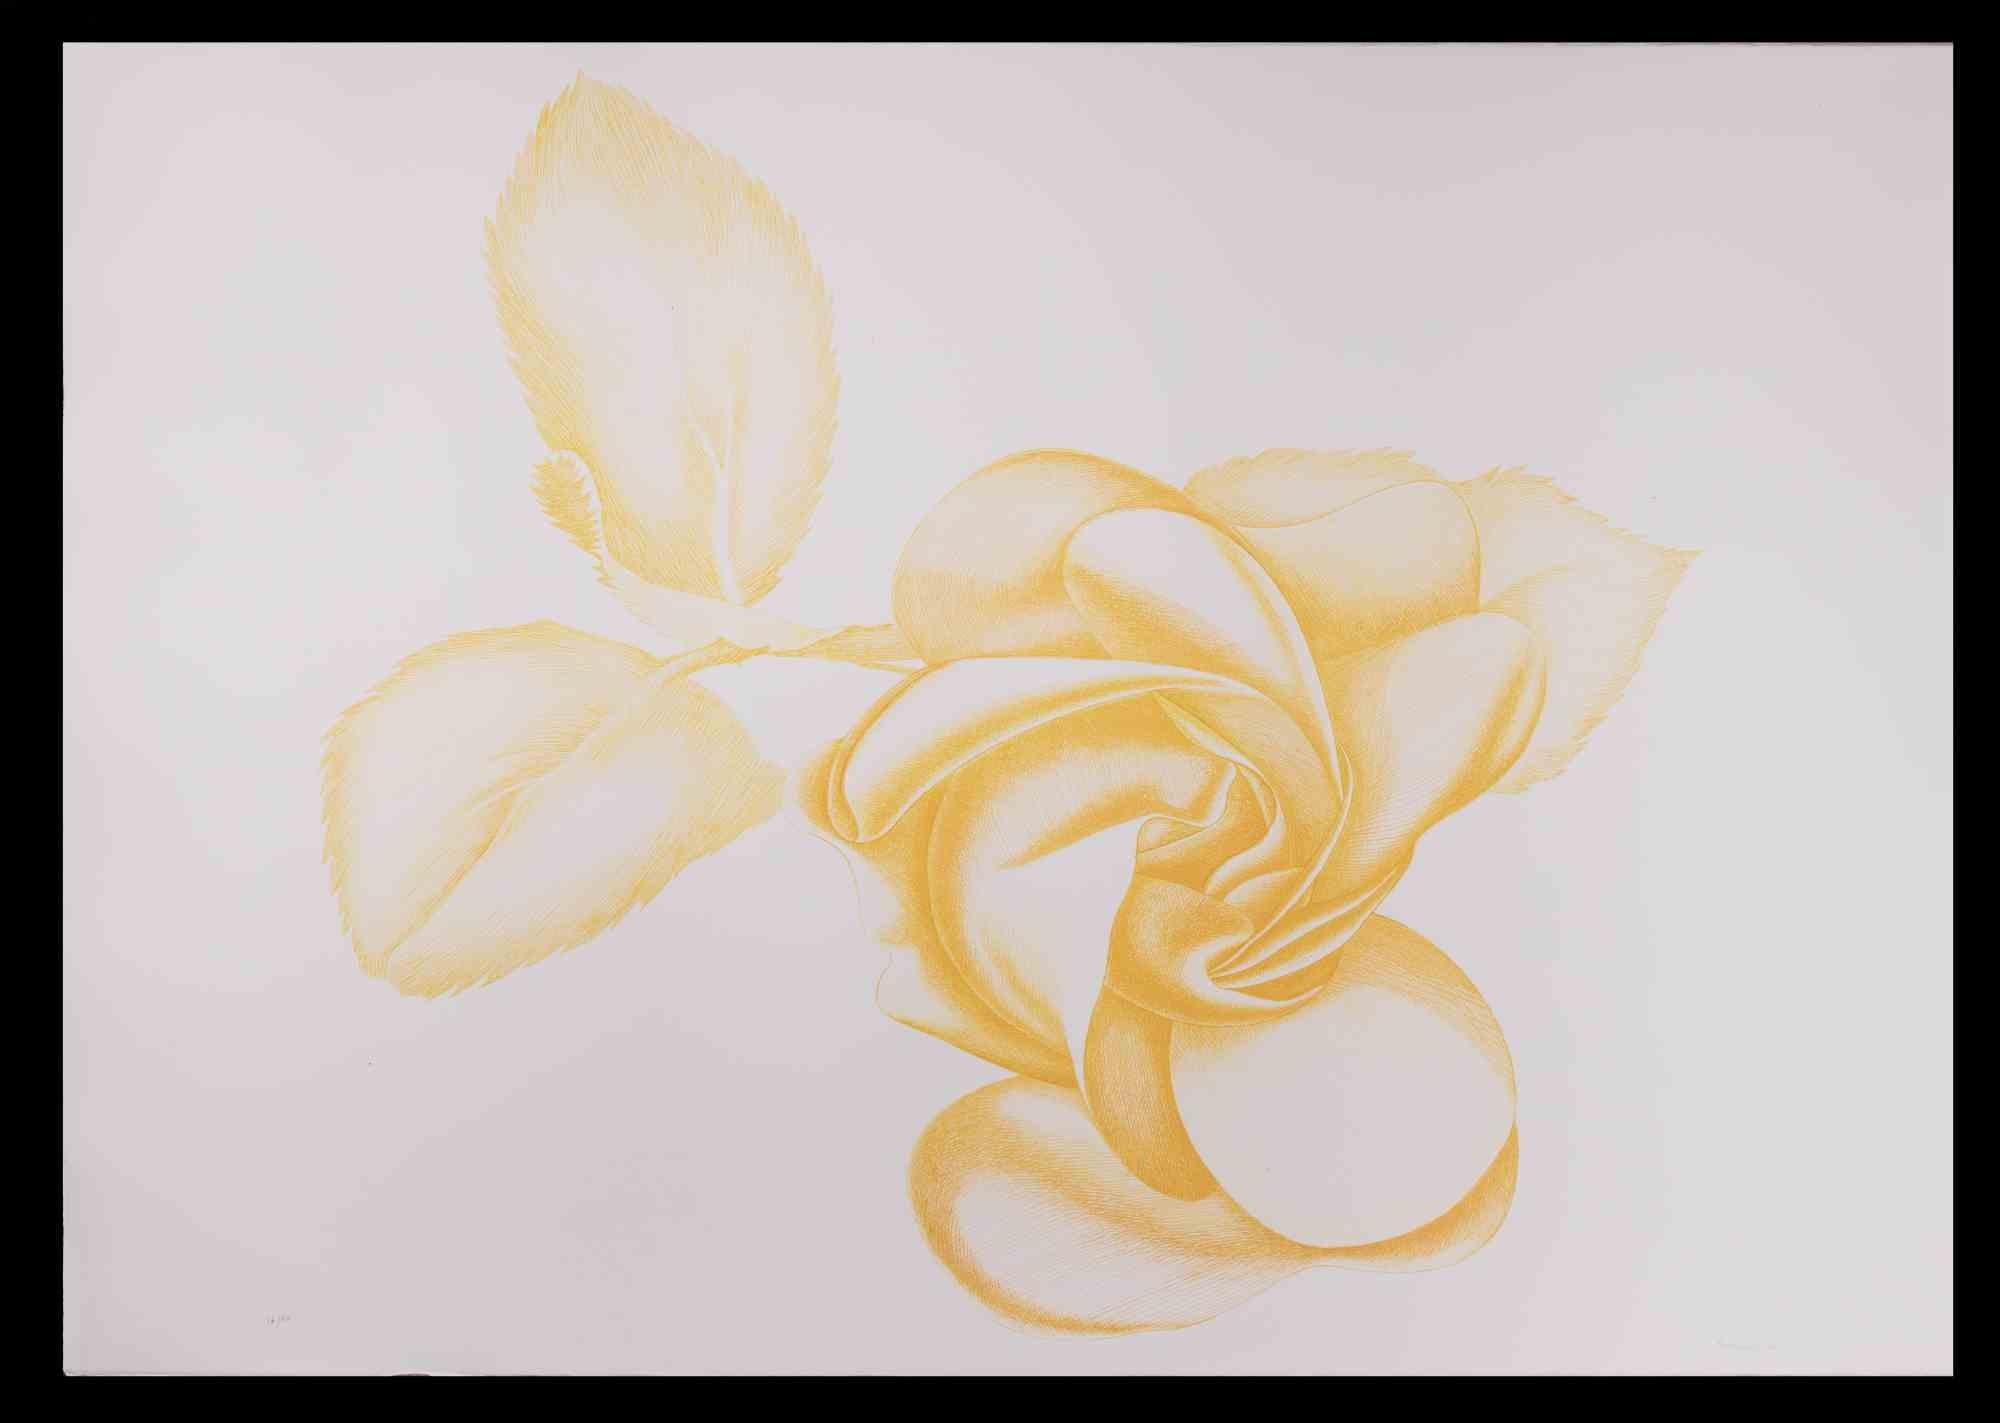 Yellow Rose is an original modern artwork realized by the Italian artist Giacomo Porzano (1925-2006) in 1972

Mixed colored etching.

Hand-signed and dated on the lower right. Edition 16/50.